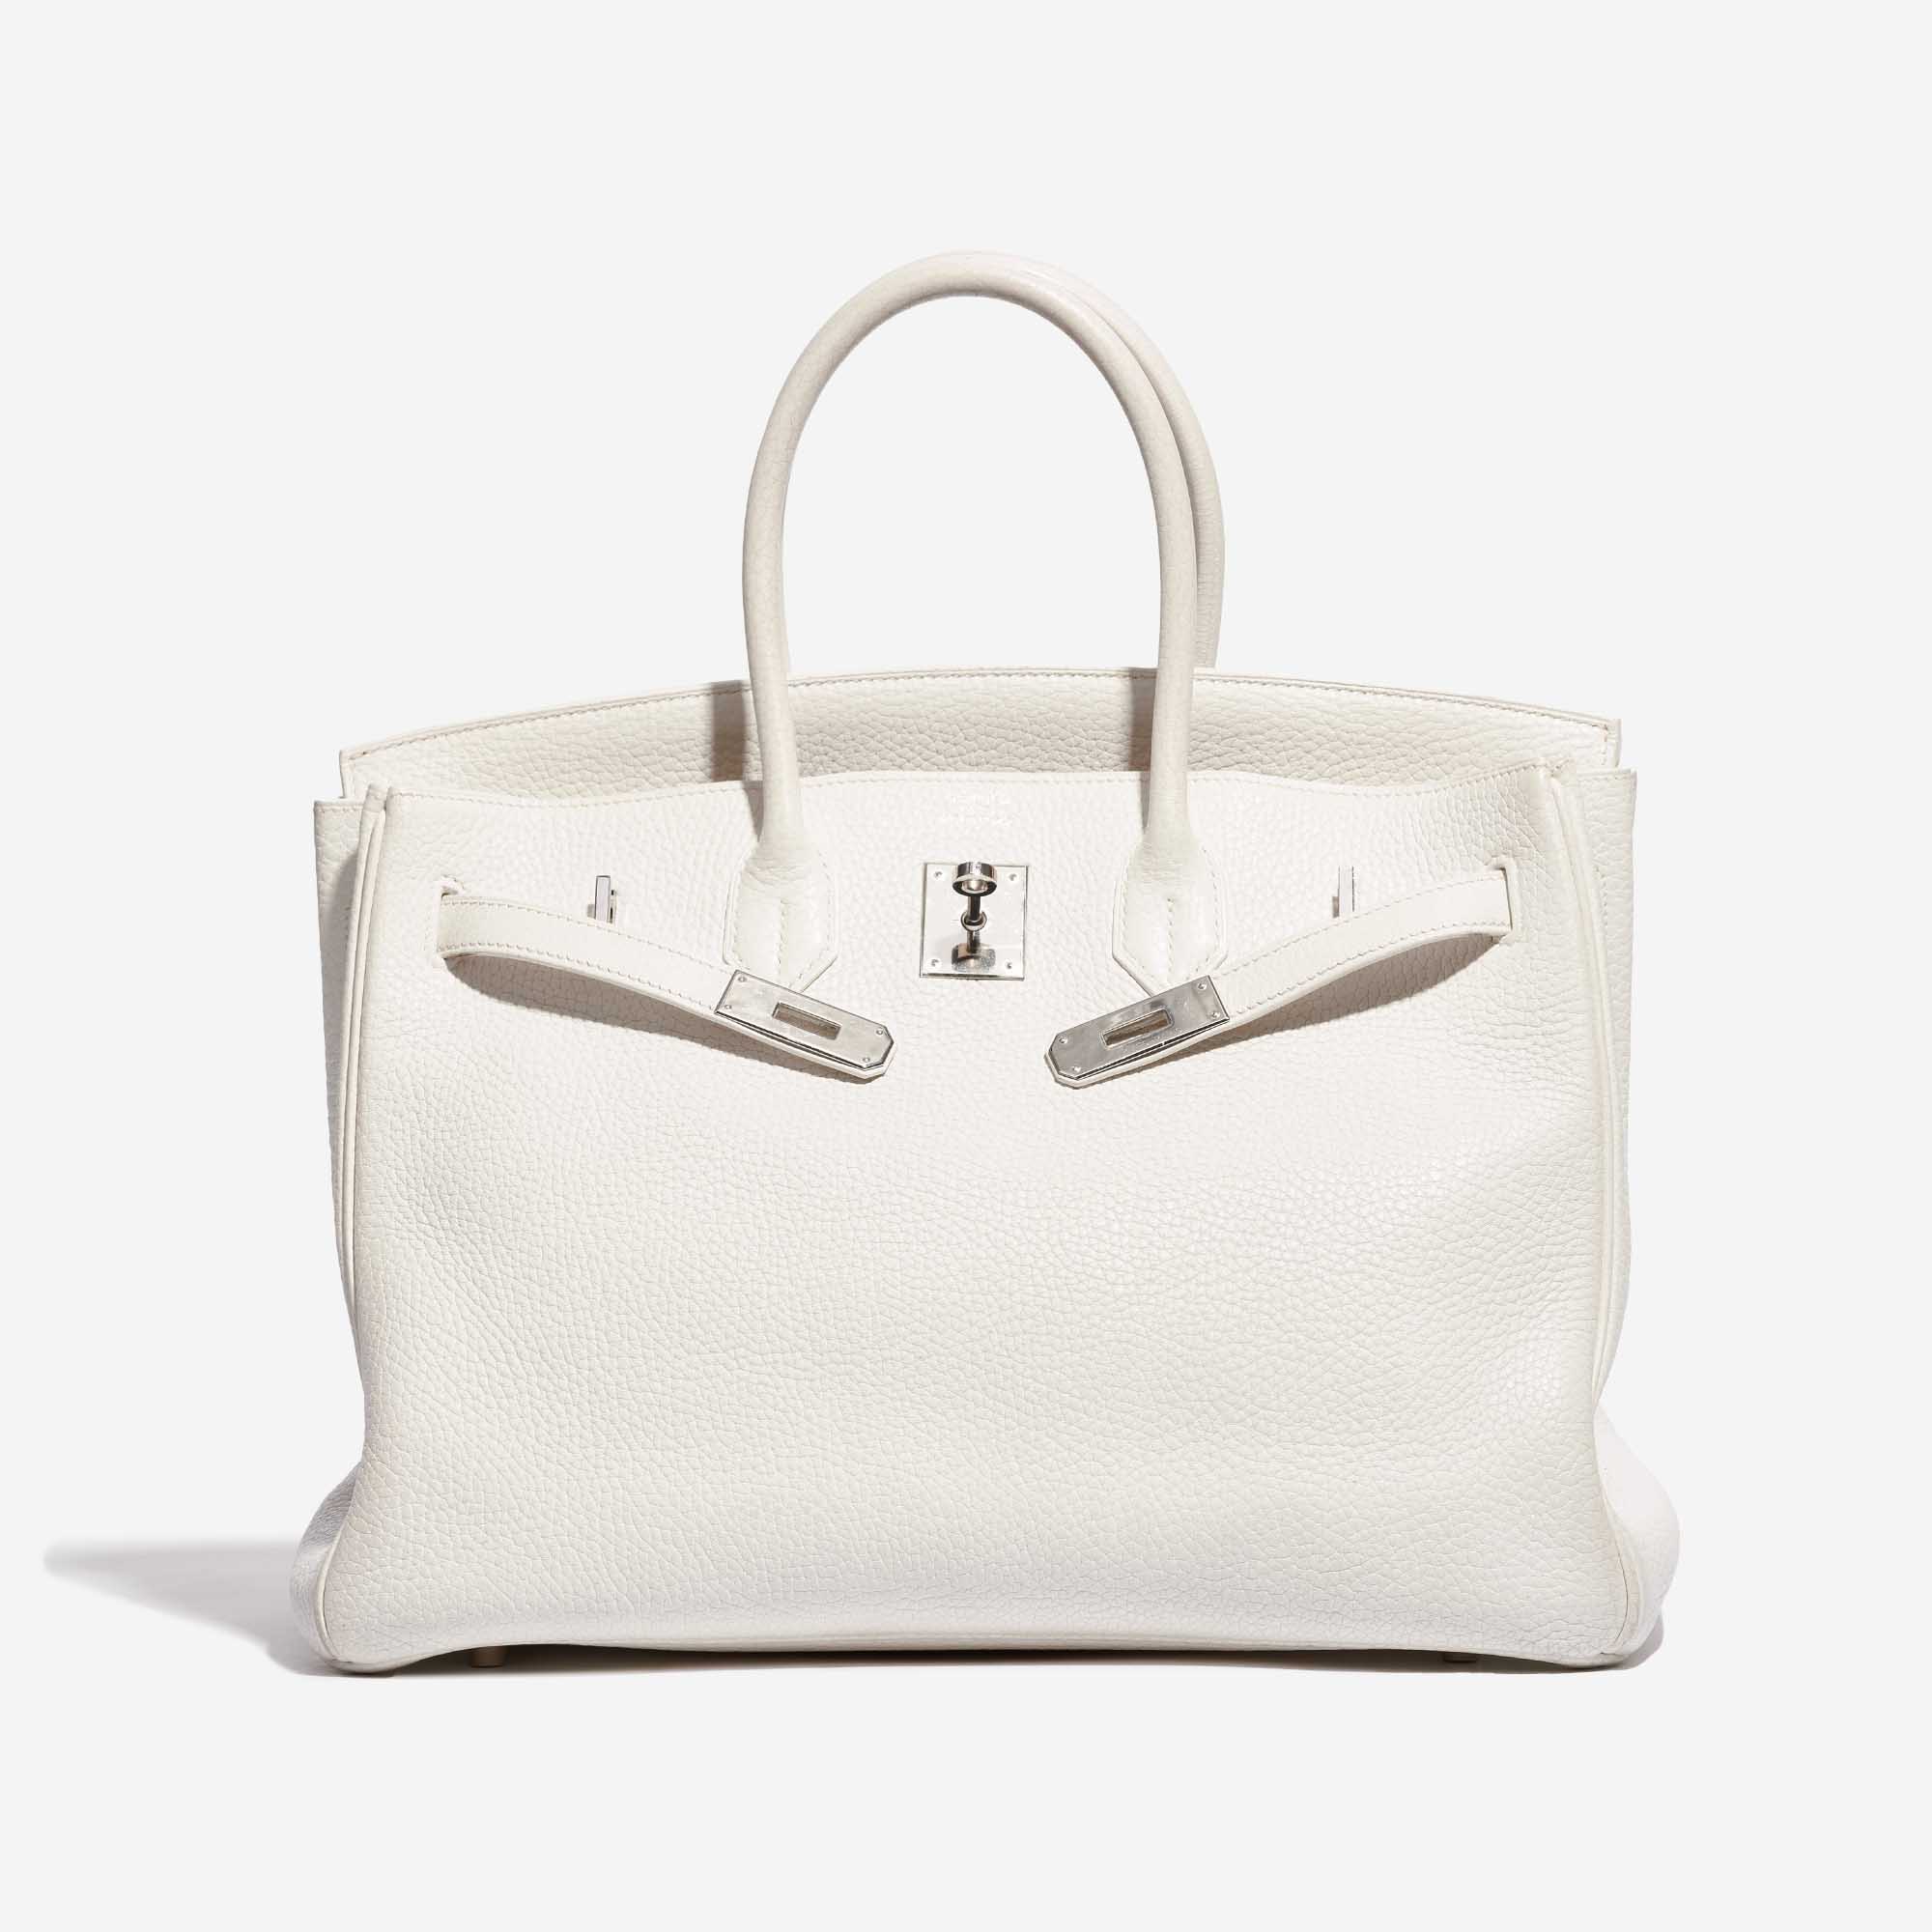 Pre-owned Hermès bag Birkin 35 Clemence White White Front Open | Sell your designer bag on Saclab.com